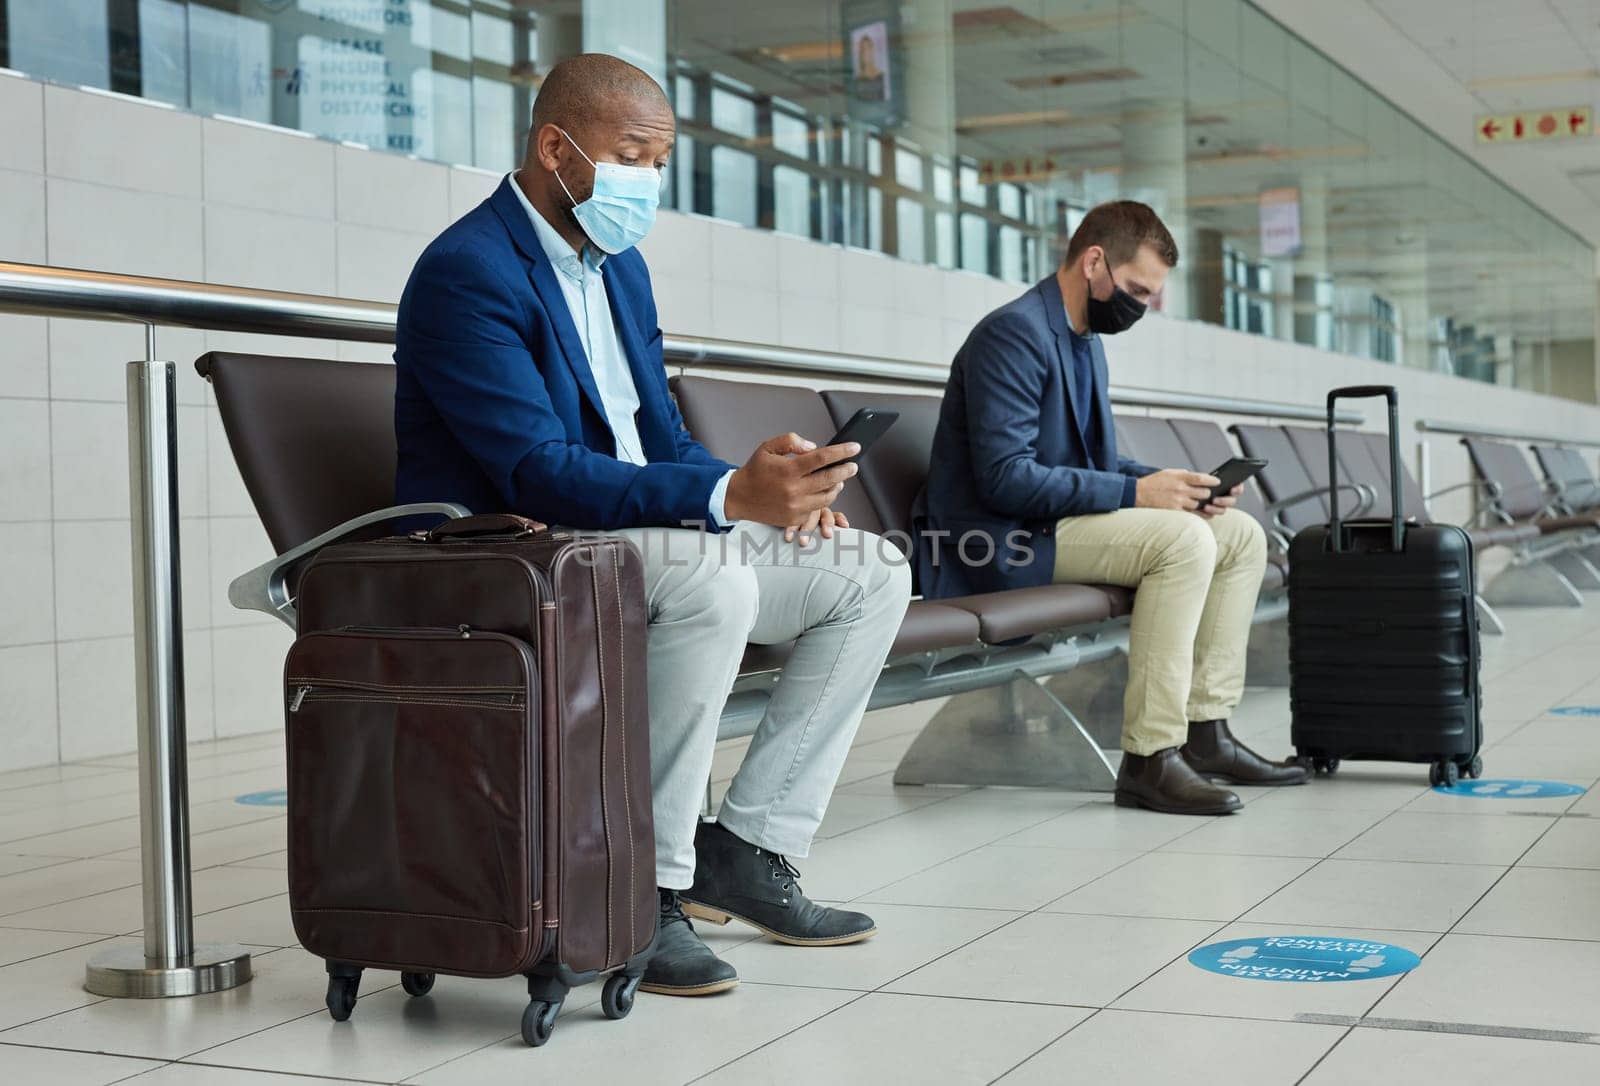 Social distance, suitcase and businessmen waiting in the airport and networking with cellphone. Face mask, luggage and professional male employees sitting with travel restrictions browsing on a phone.